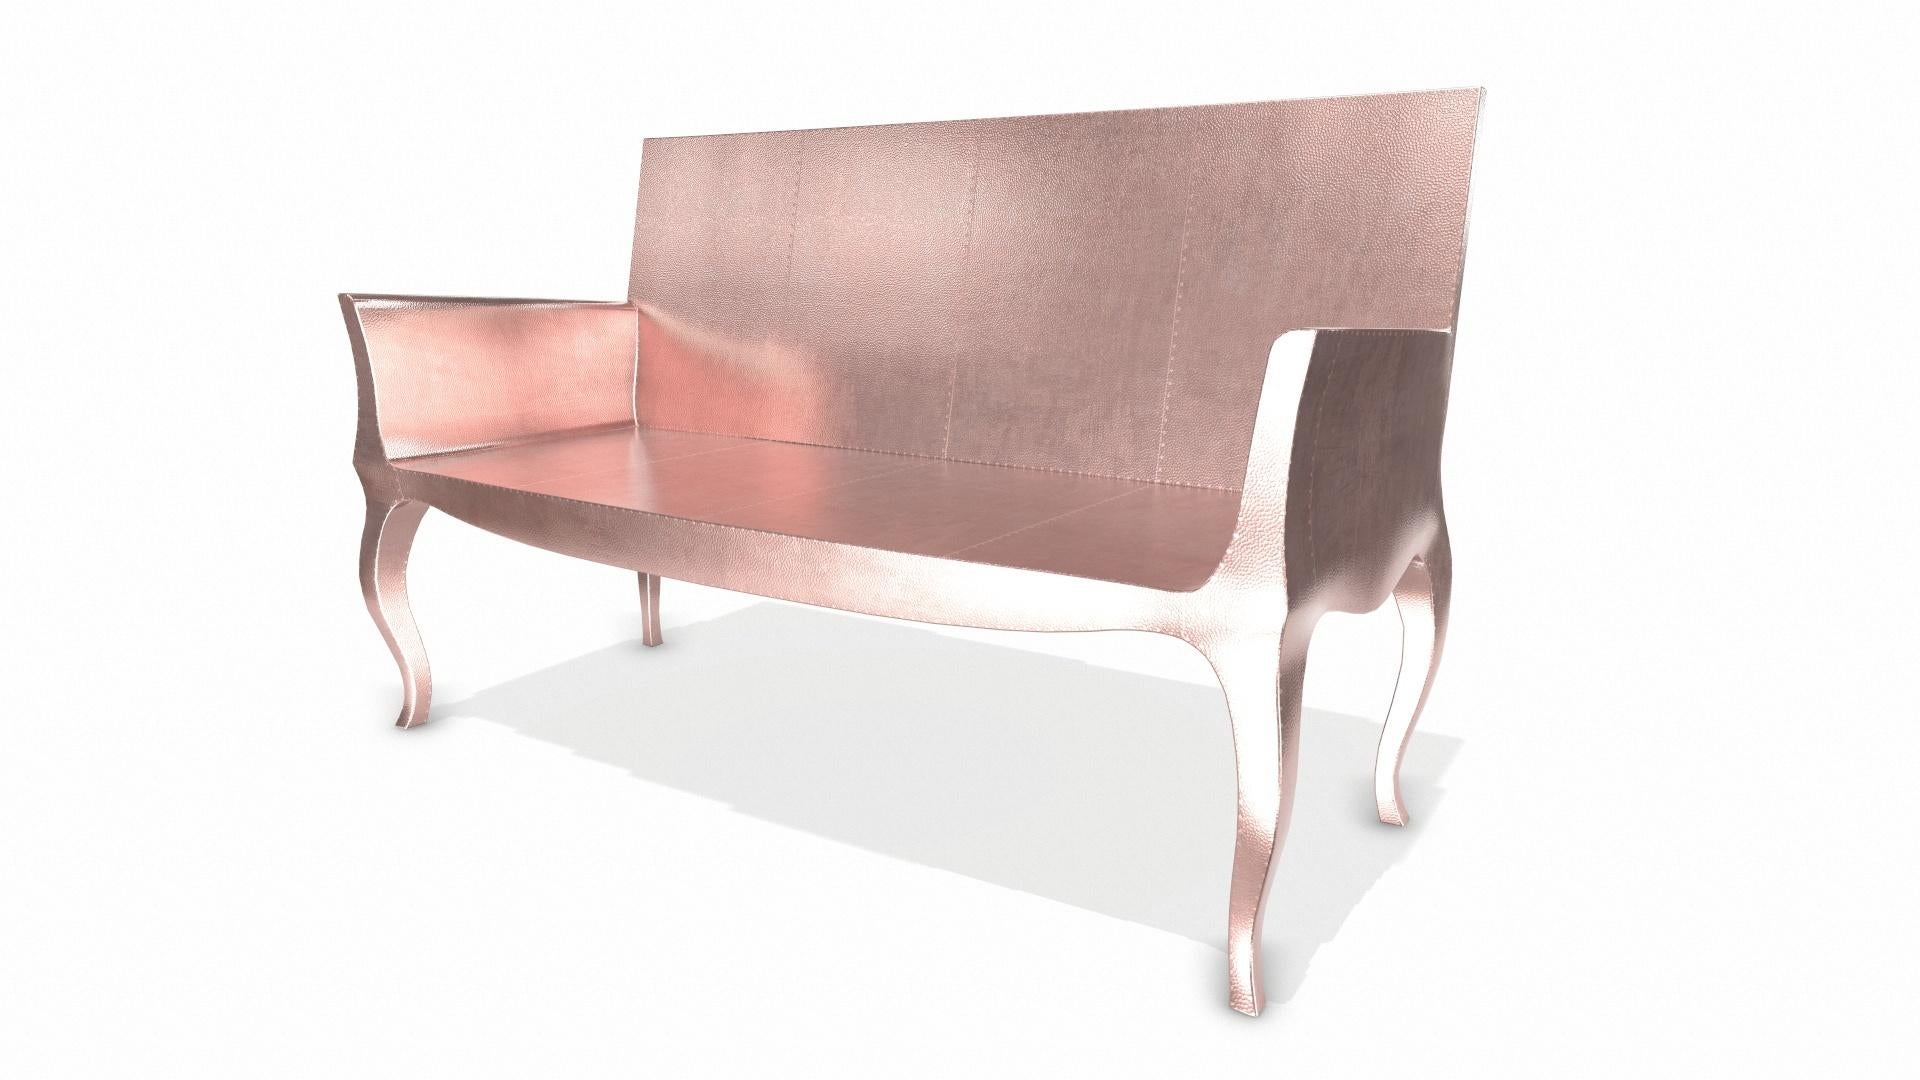 American Louise Settee Art Deco Benches in Mid. Hammered Copper by Paul Mathieu For Sale